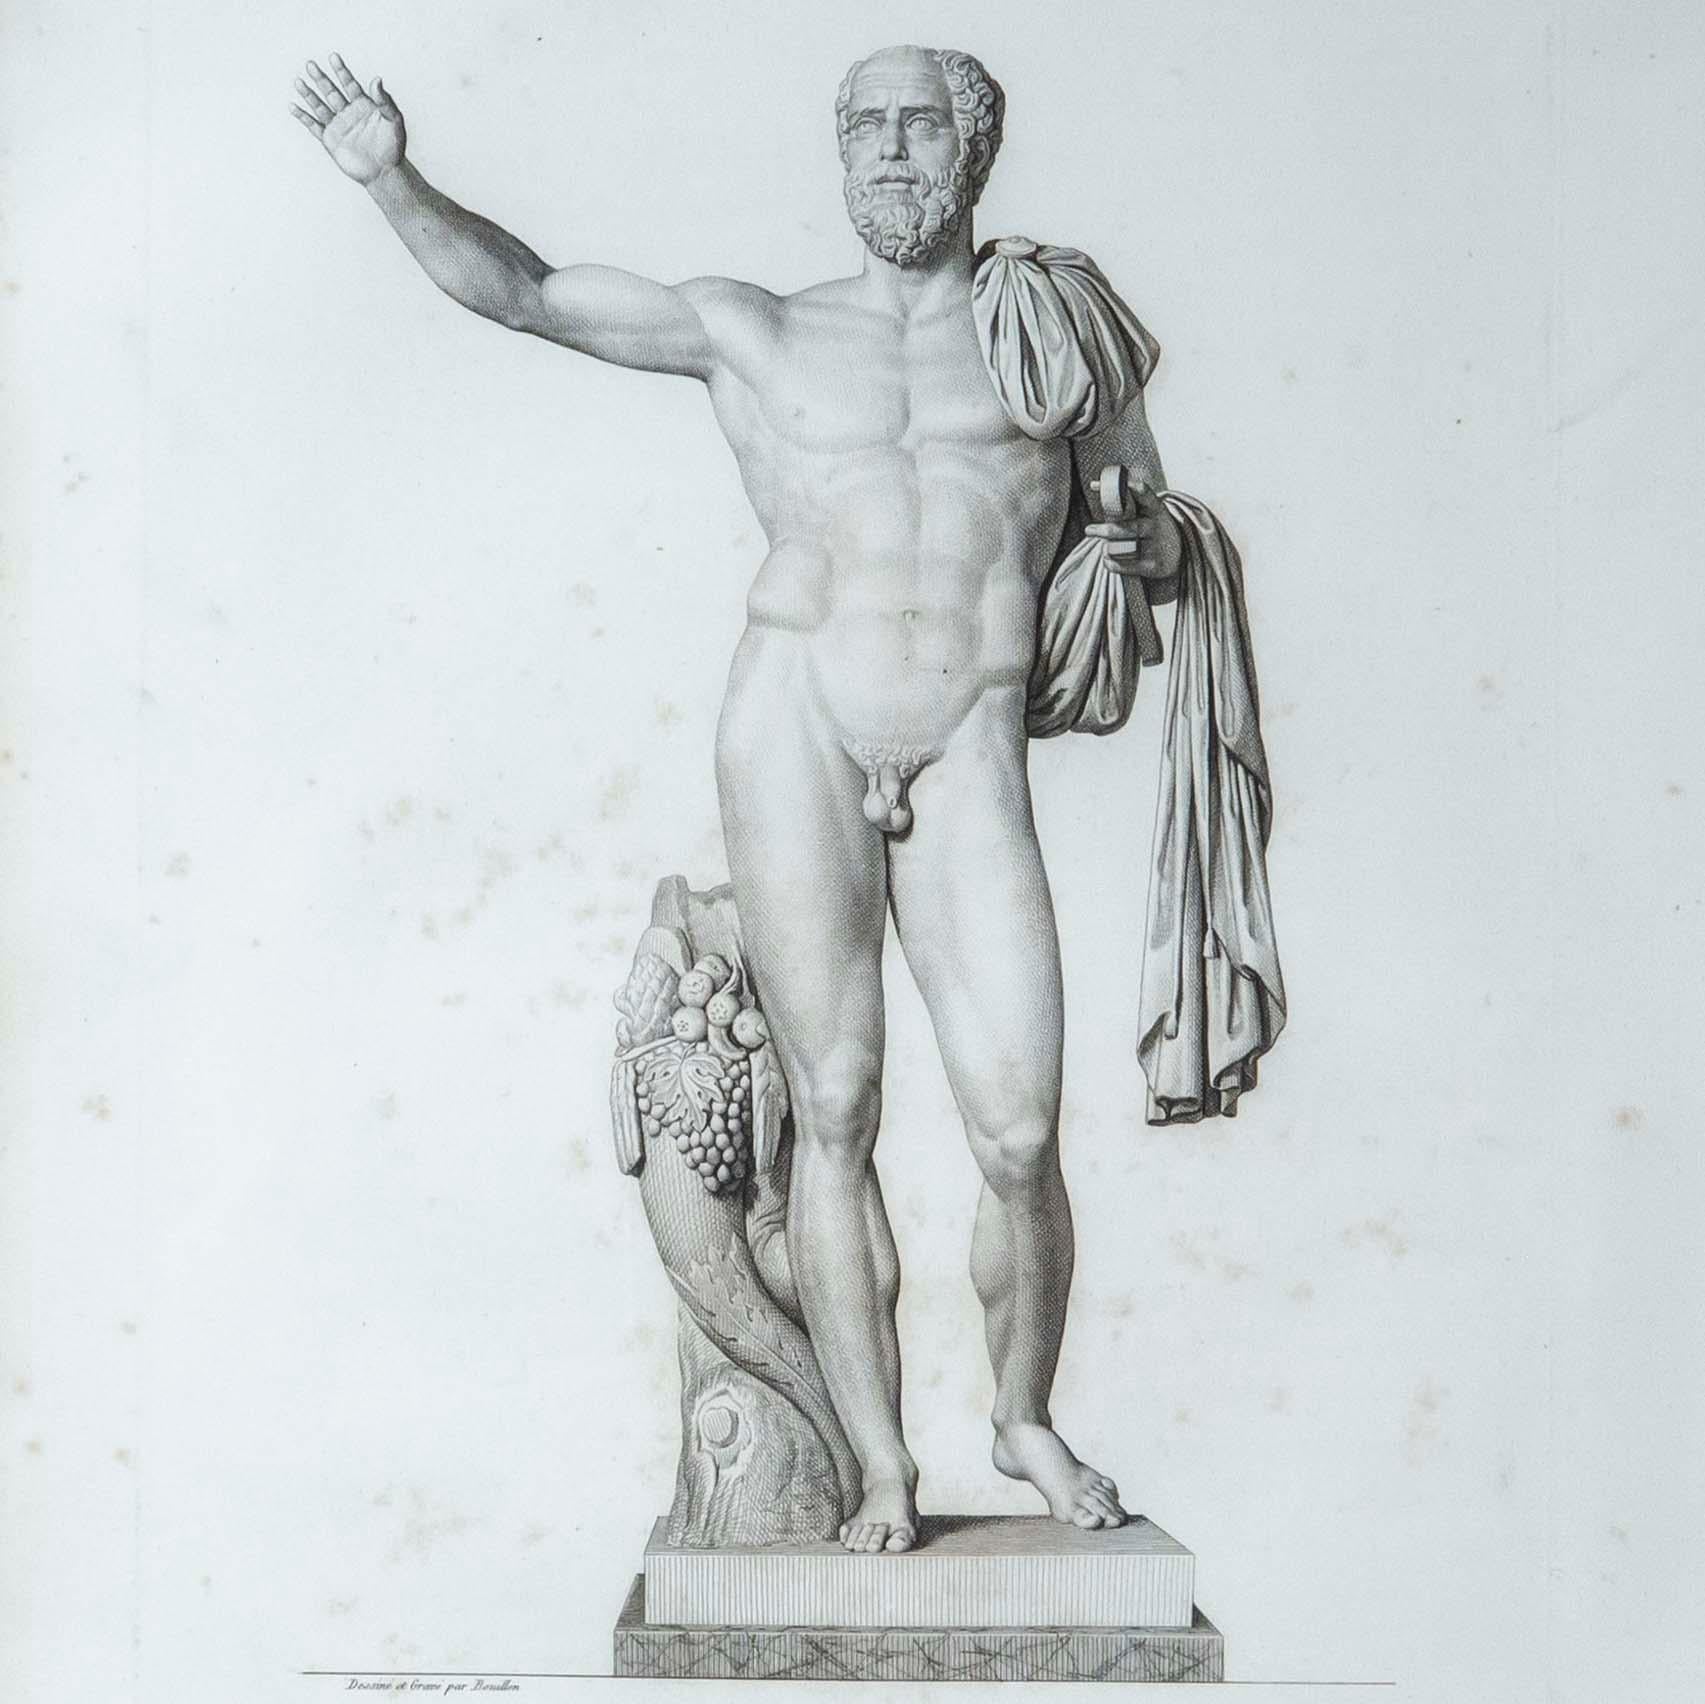 Two exquisite and rare etchings of ancient sculptures by Pierre Bouillon (1776-1831), from his book Musée des antiques, published in Paris between 1811-1827. The two plates, titled Pupien and Pecheur Africain, depict the ancient marble statues from